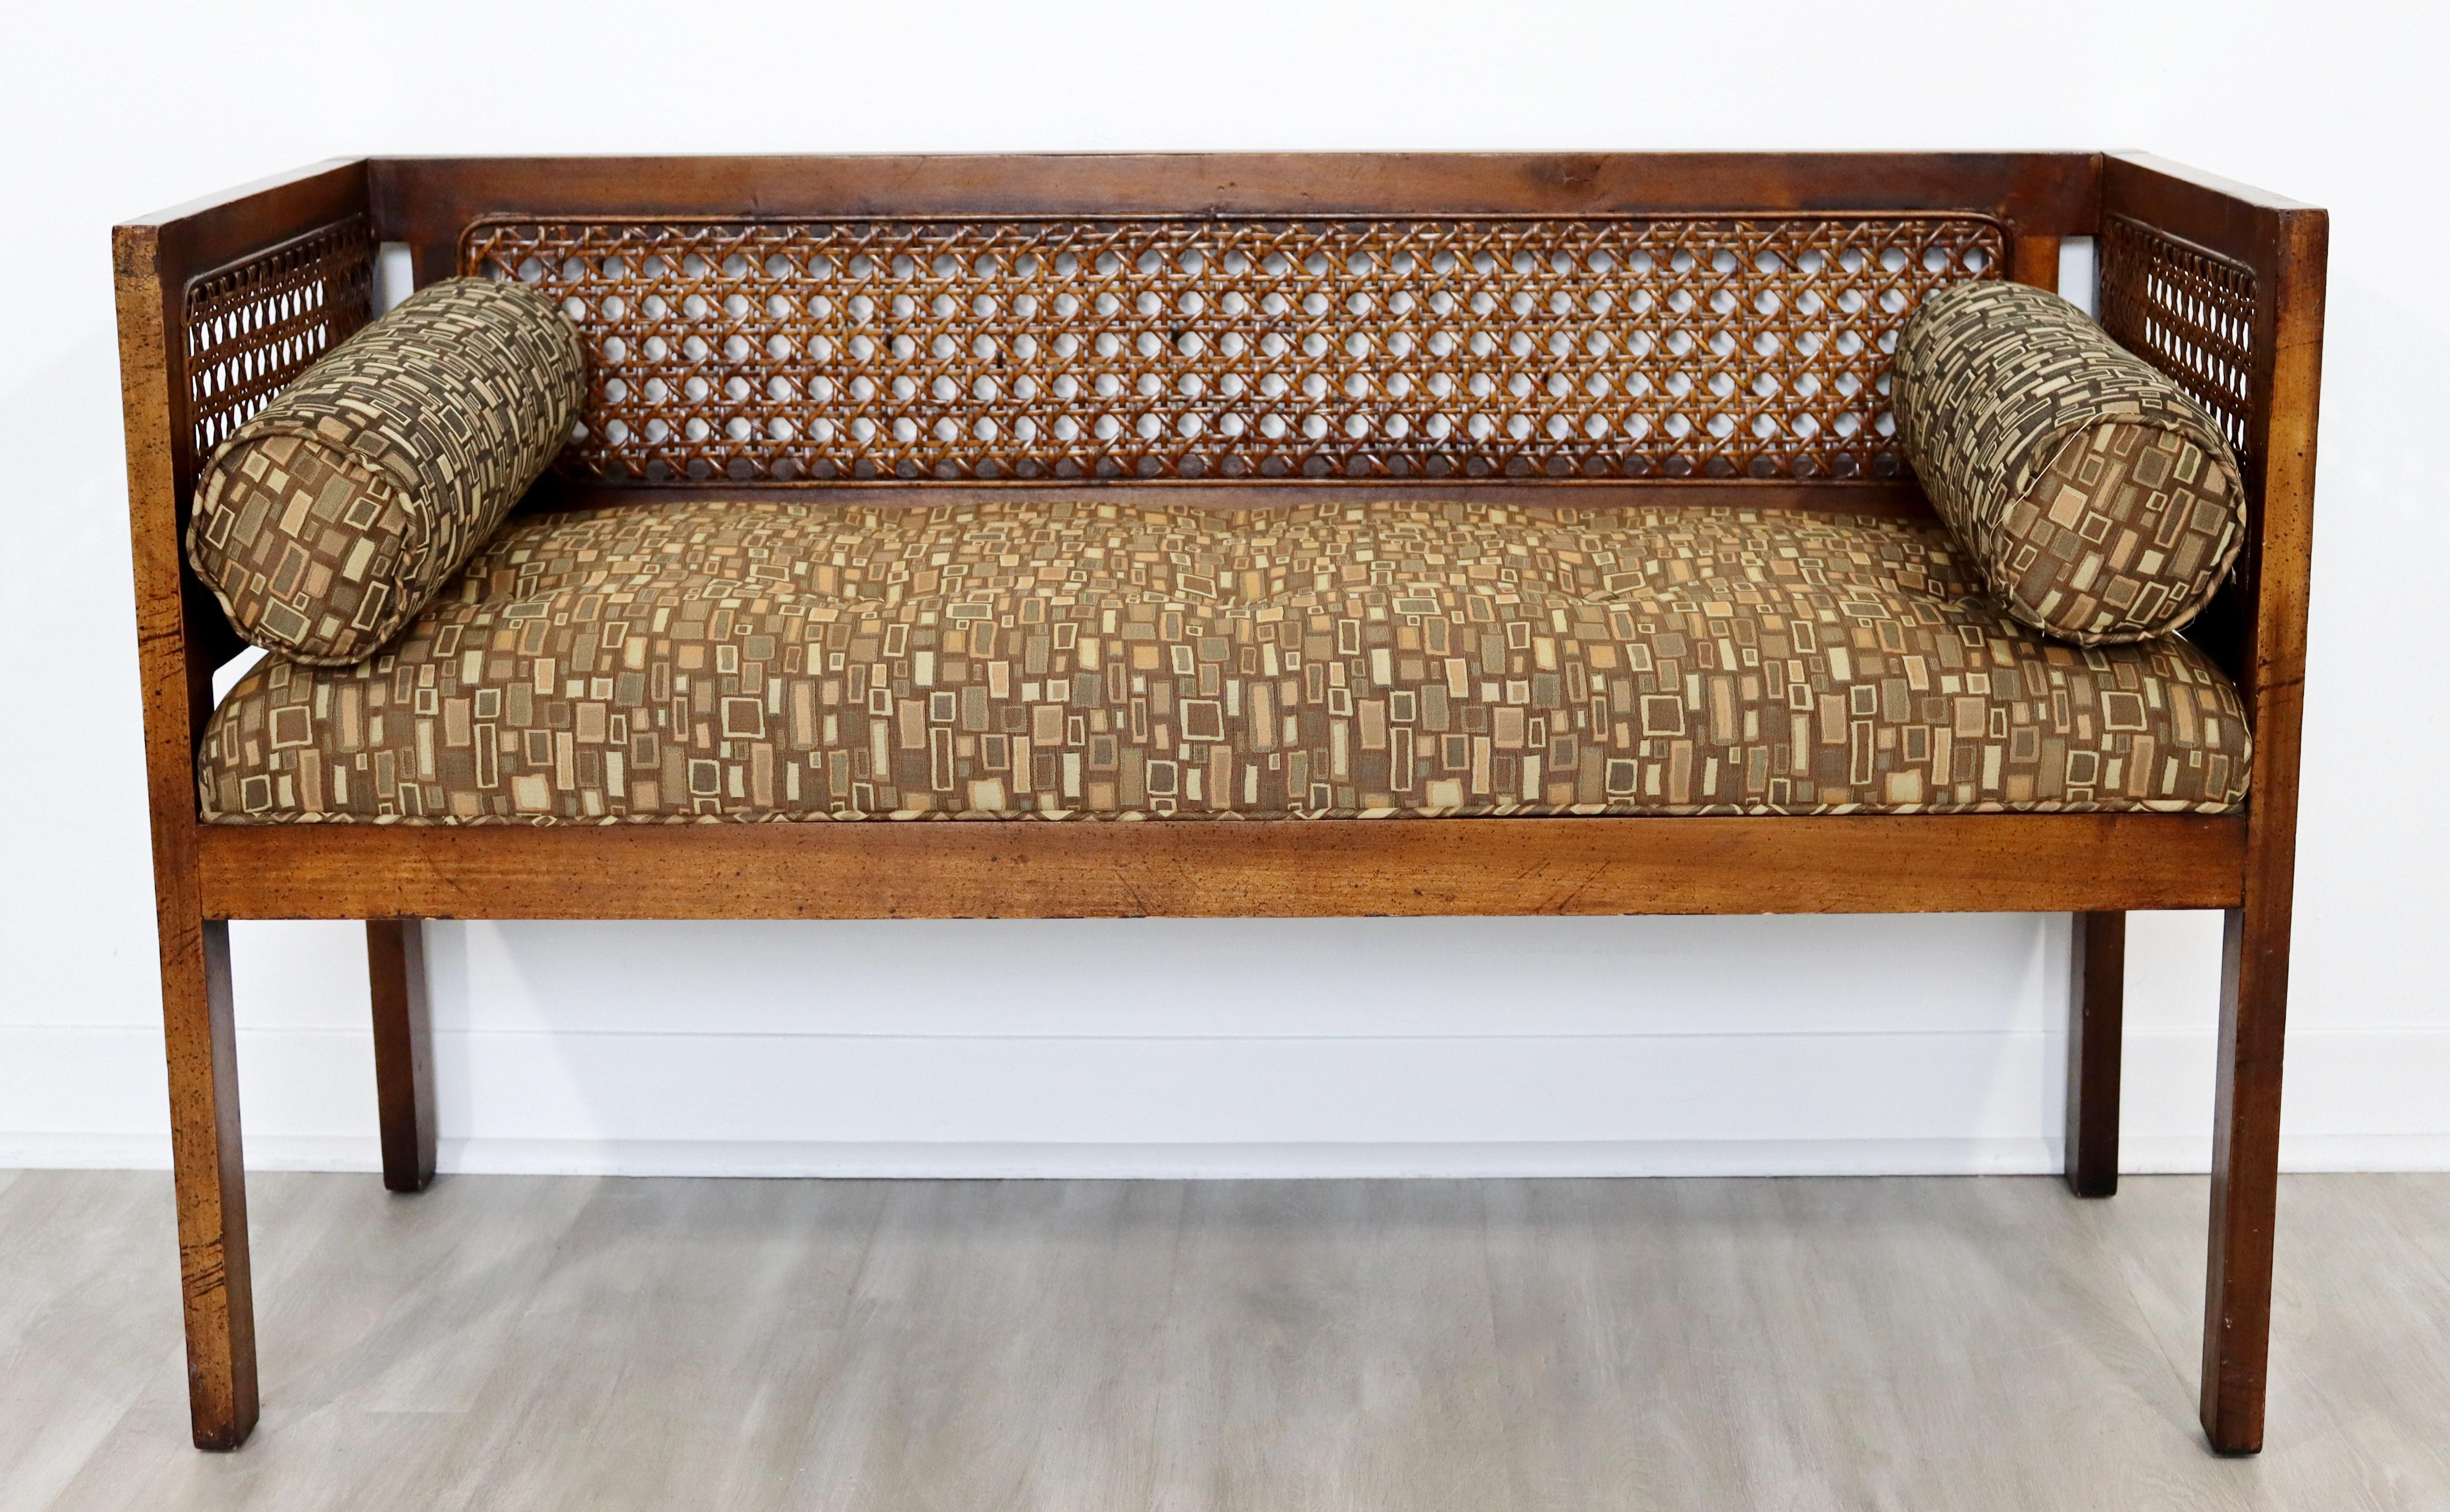 For your consideration is a classic bench seat, made of wood and with a rattan cane back, circa the 1950s 1960s. In excellent vintage condition. The dimensions are 43.5